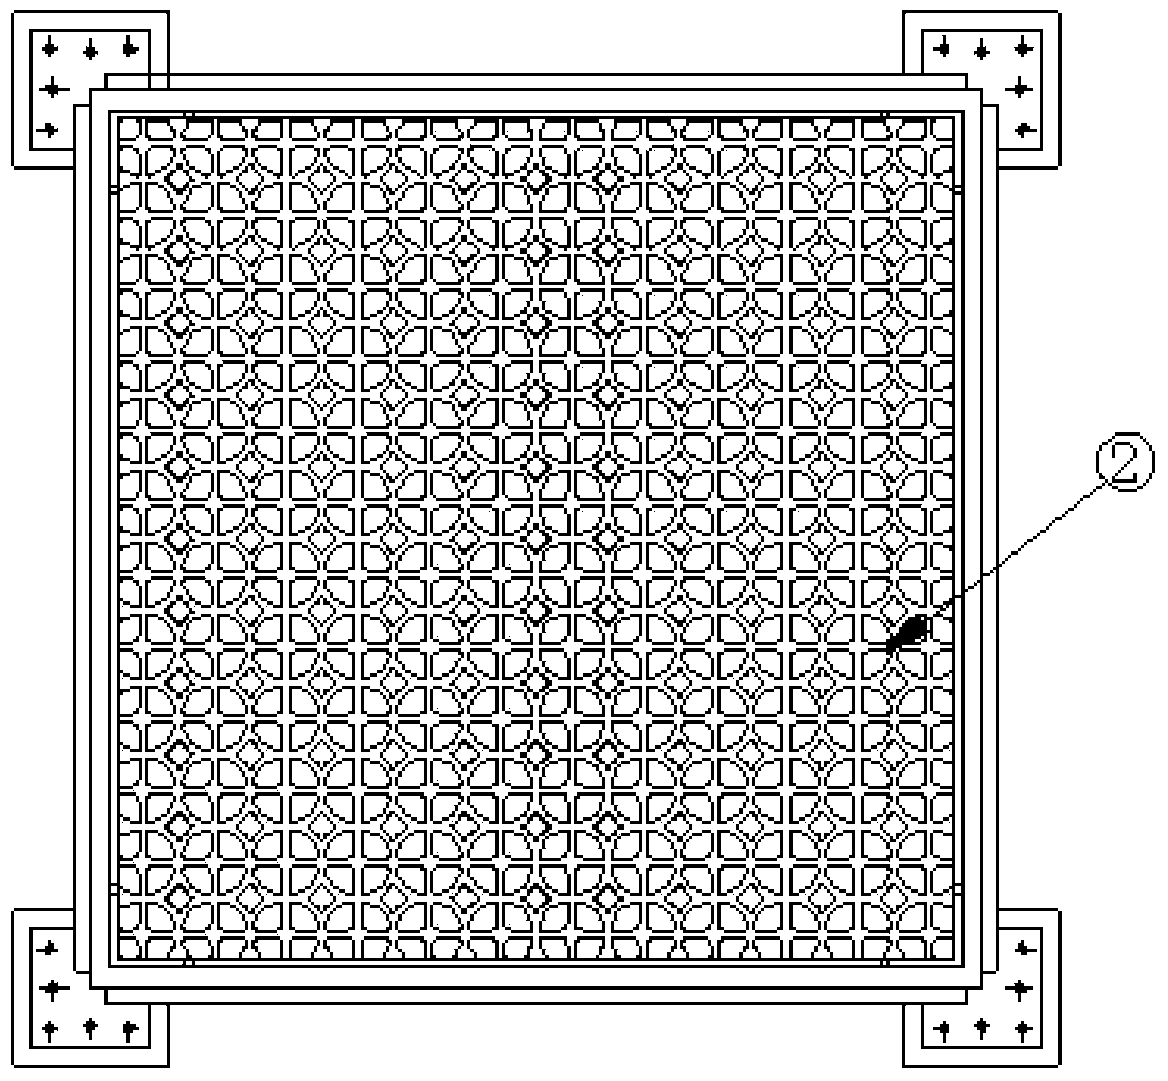 Ventilation guide plate for computer room